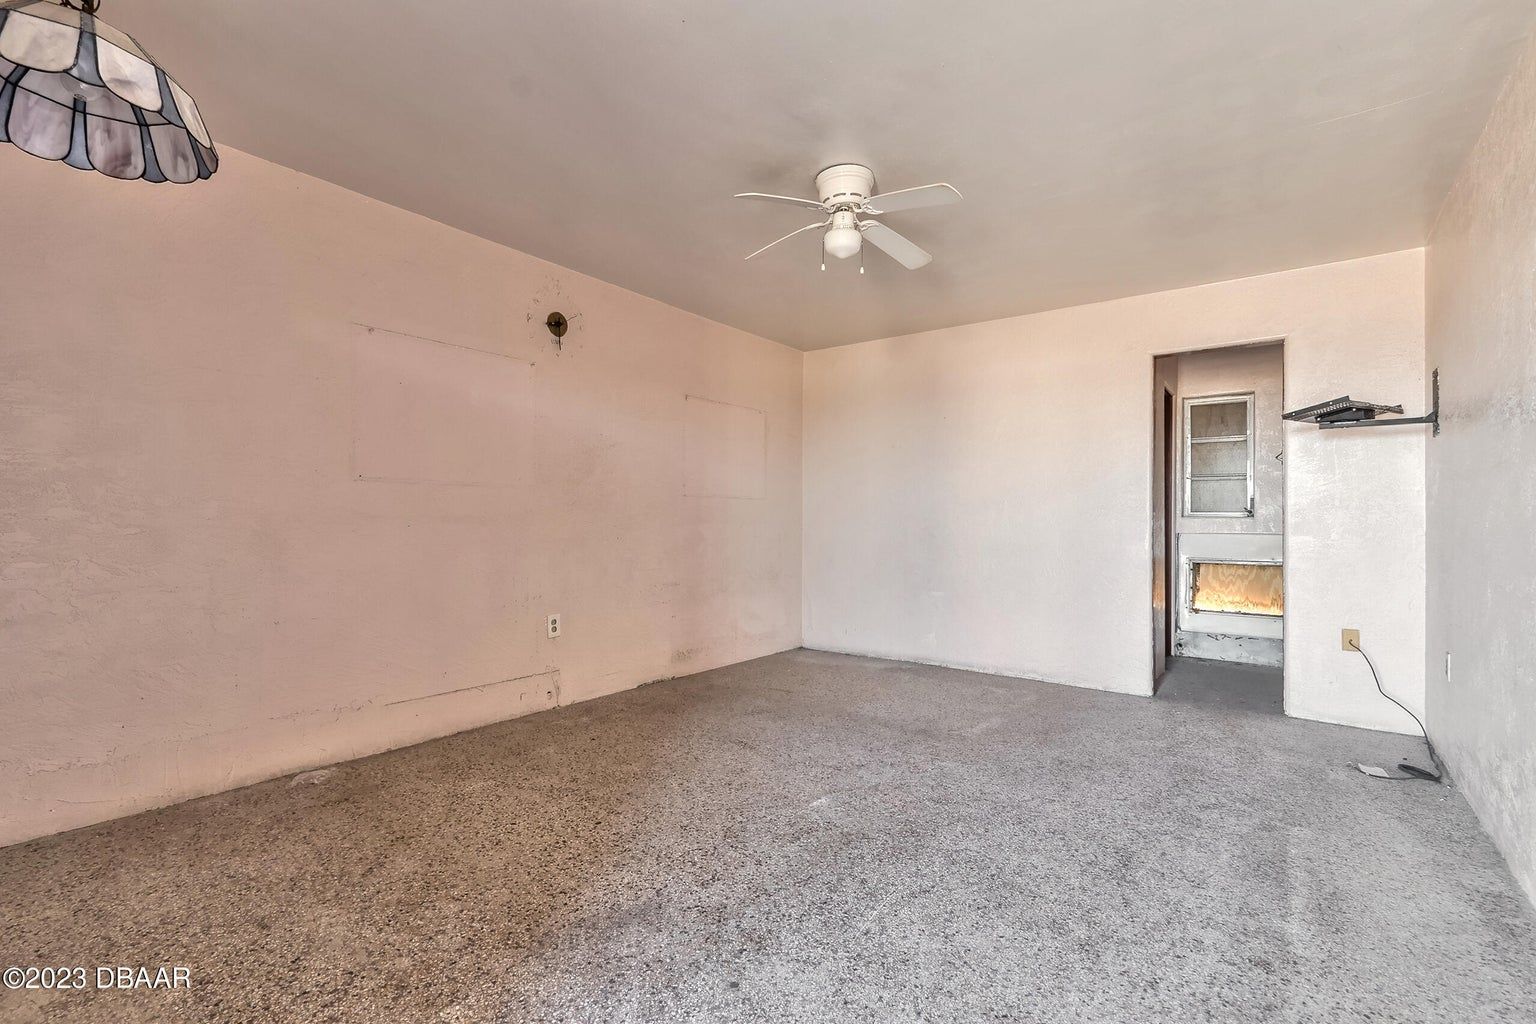 an empty room with a ceiling fan in the corner